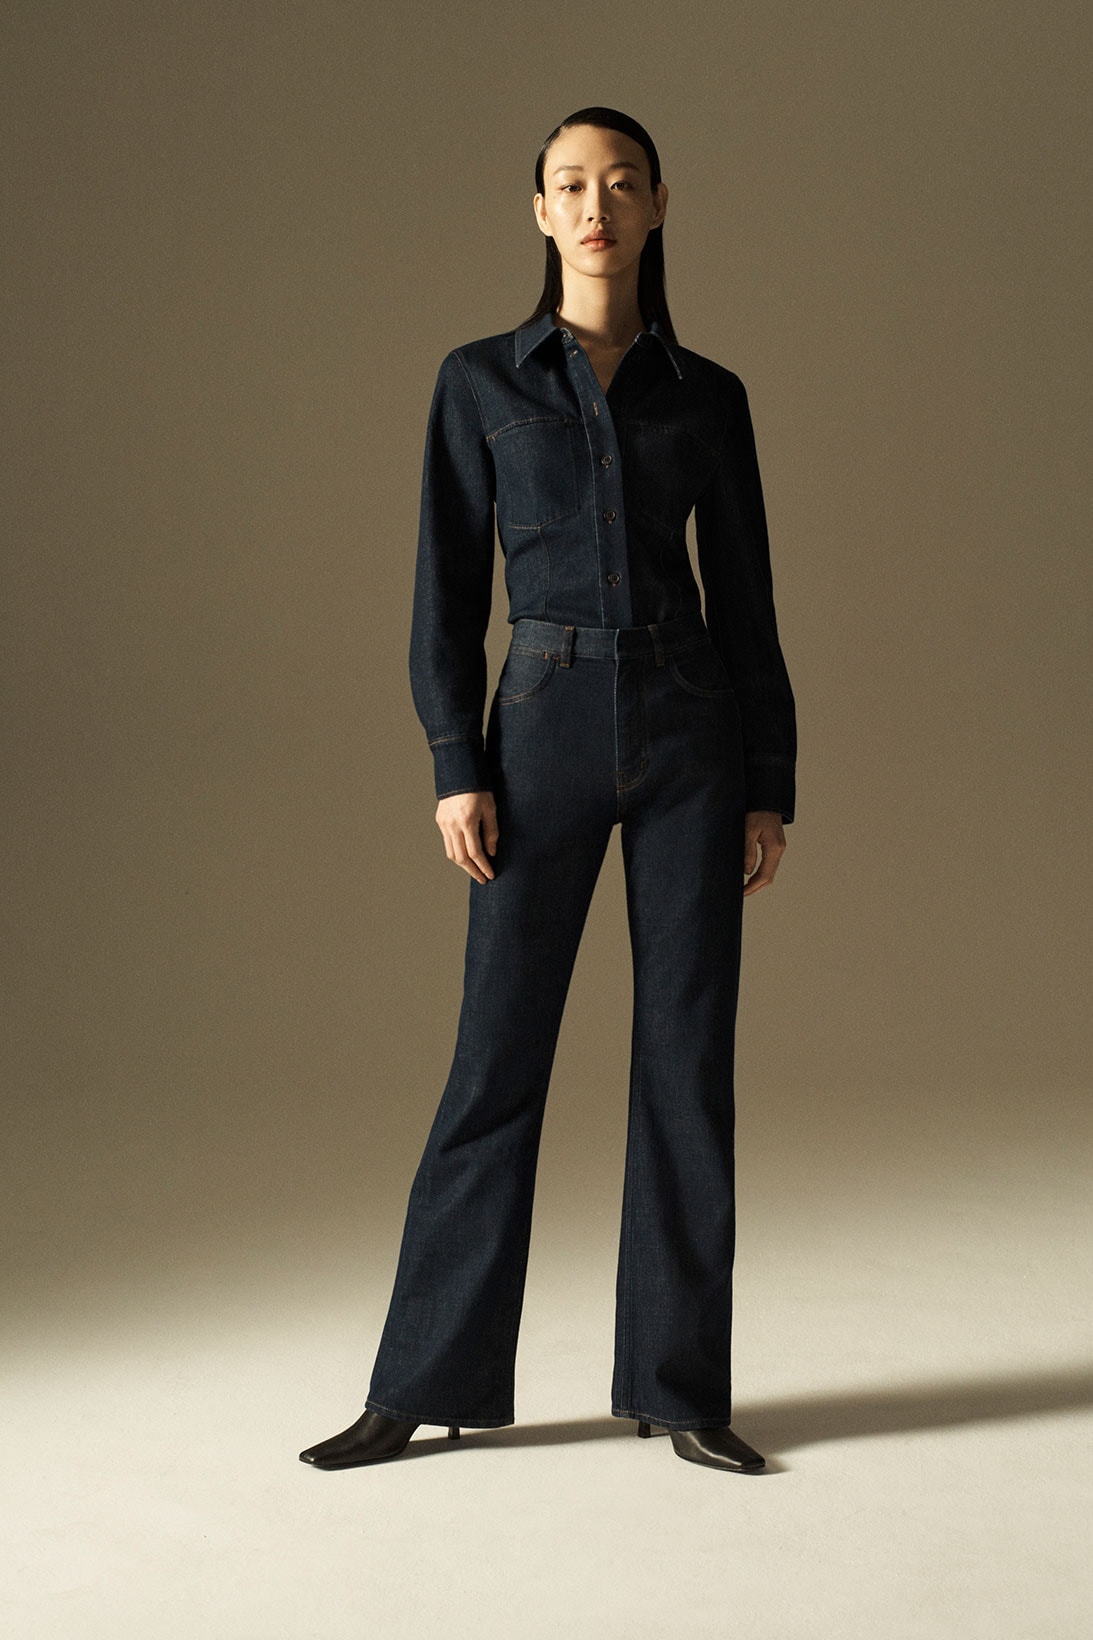 cos spring summer 2021 ss21 sustainable denim collection jeans sora choi shirt trousers boots